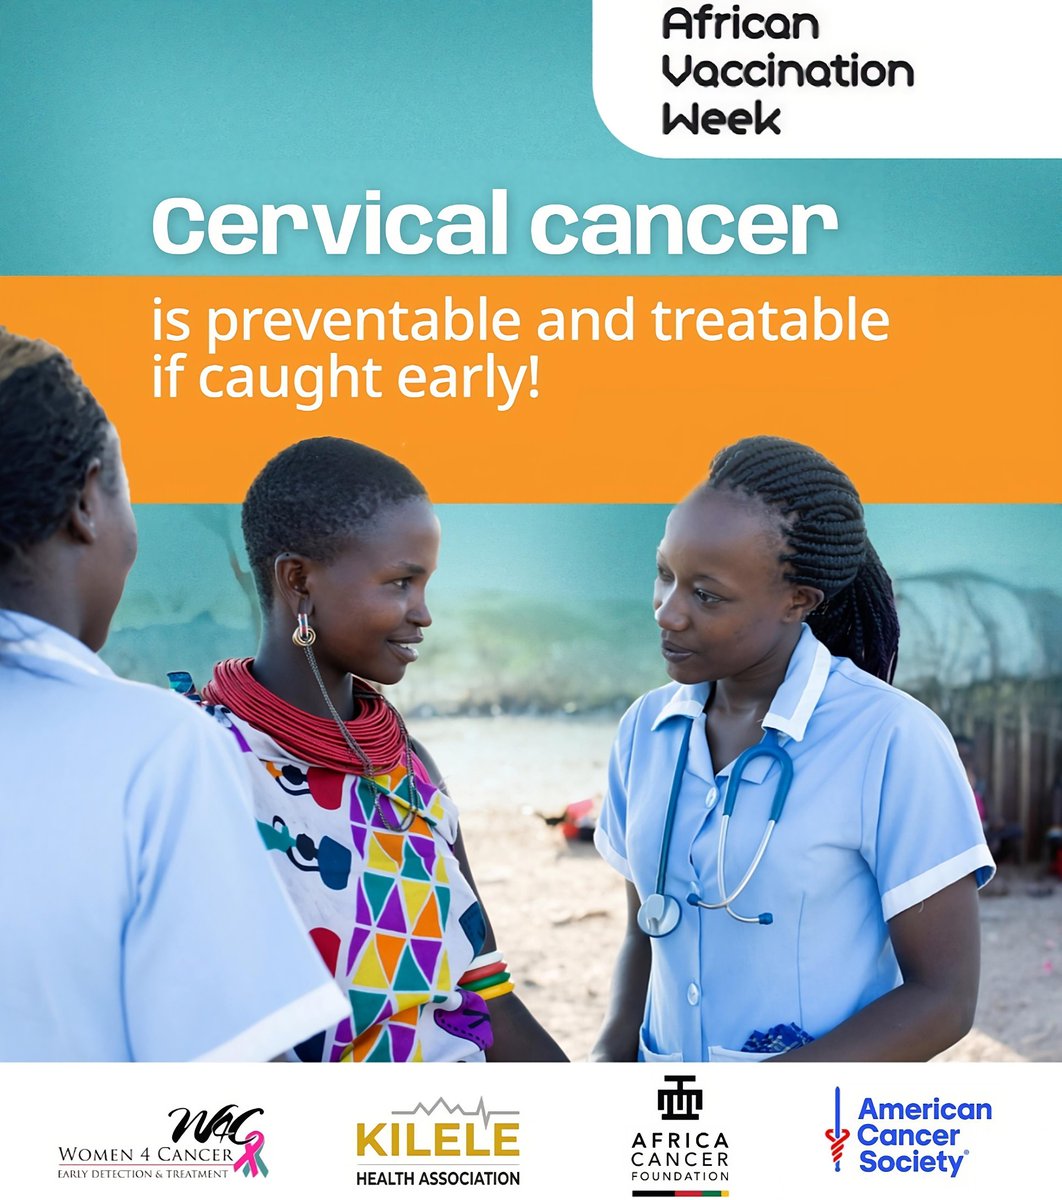 In 2020, the World Health Organization (WHO) launched a global initiative to eliminate #cervicalcancer which set targets for three important strategies: HPV vaccination, cervical cancer screening and treatment. To achieve elimination, by 2030, 90% of girls need to be vaccinated..